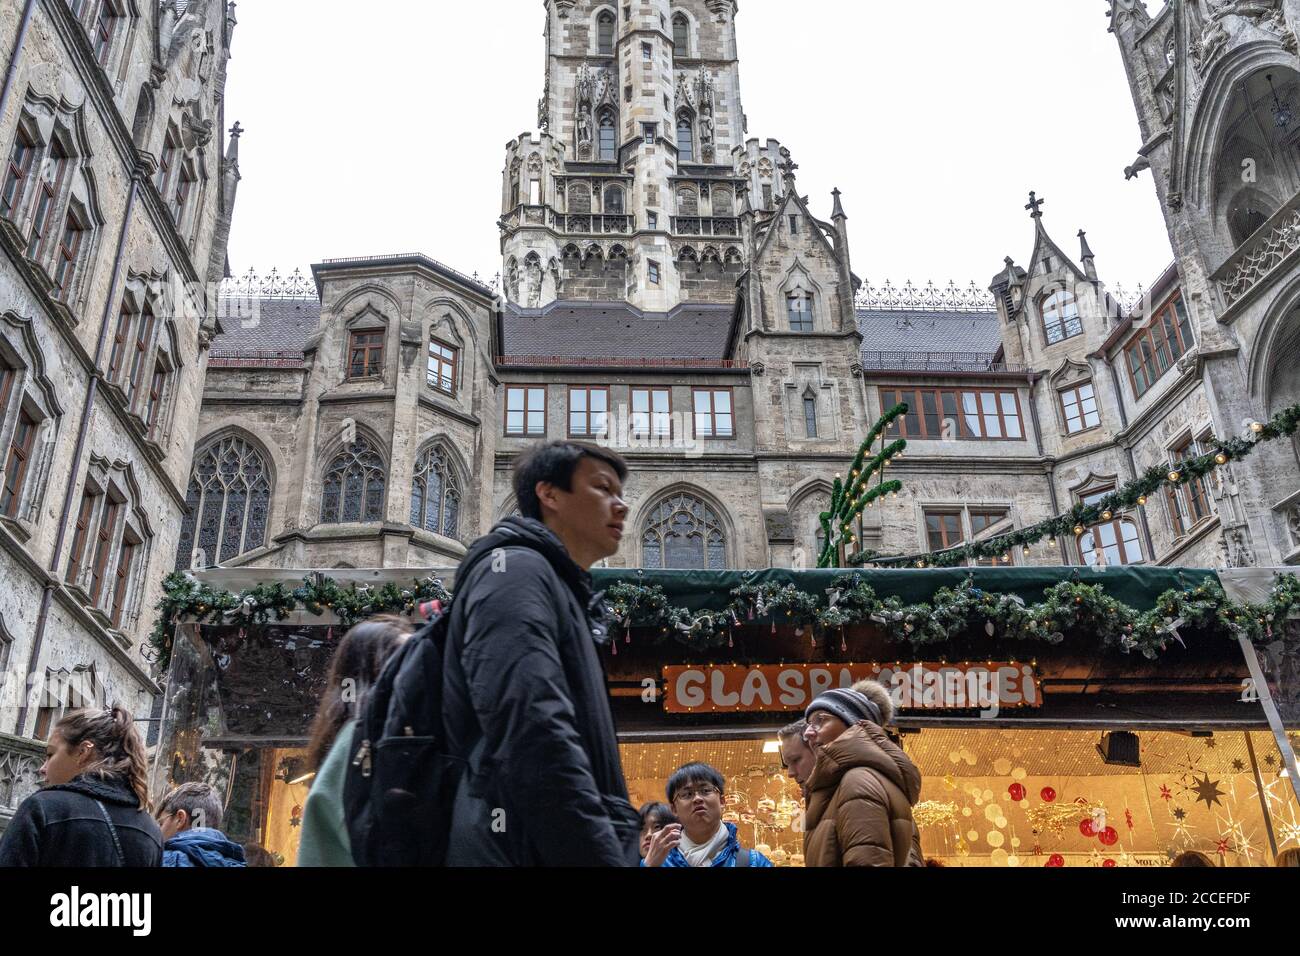 Europe, Germany, Bavaria, Munich, Christmas market in the courtyard of the New Town Hall on Munich's Marienplatz Stock Photo